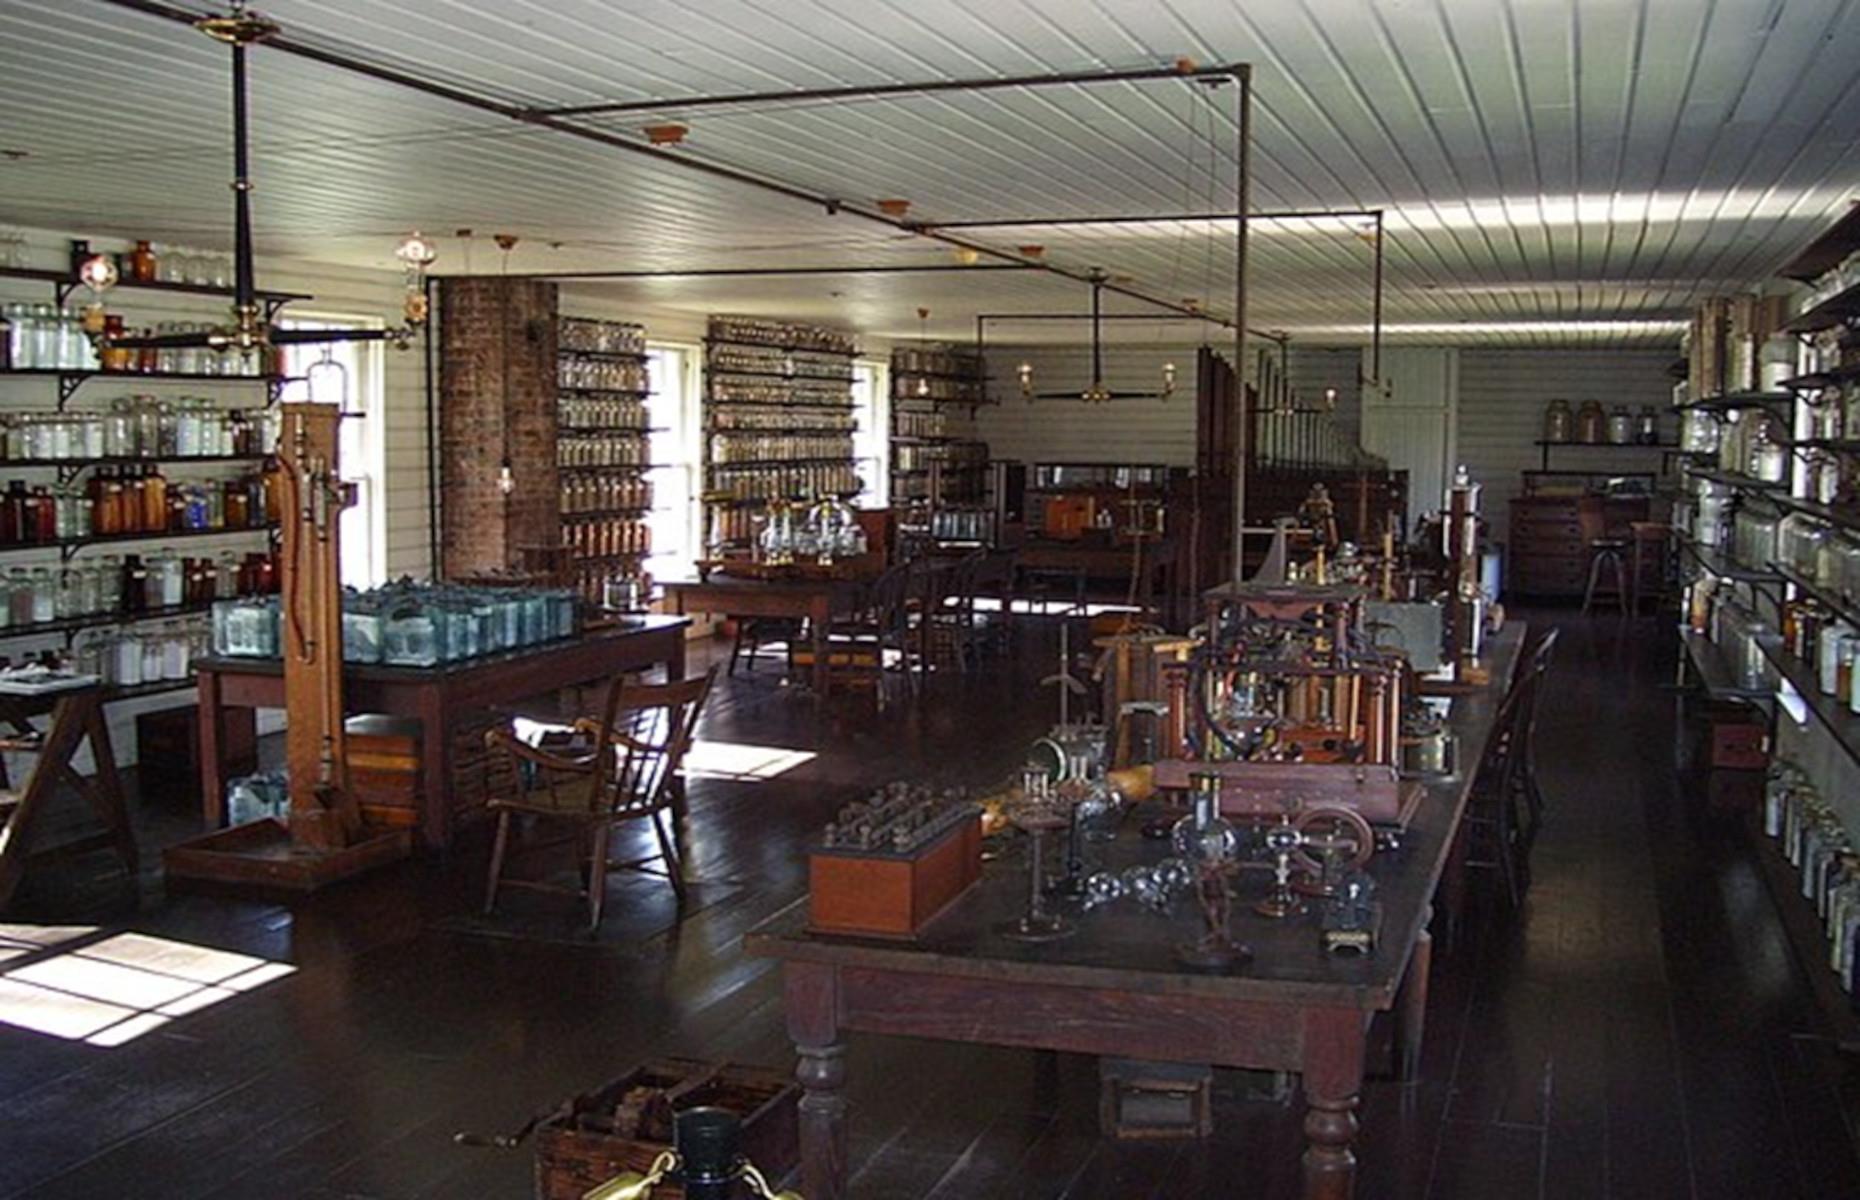 <p>The scientific sections of the museum include ‘Henry Ford’s Model T District’, where guests can trace the life and work of Henry Ford right up to his creation of the Model T, which they can then take for a spin; ‘Railroad Junction’, where visitors can climb on board a 19th-century steam engine, and explore an original 1884 ‘<a href="https://www.loveproperty.com/gallerylist/61796/13-amazing-round-houses-from-around-the-world">roundhouse</a>’ where trains were repaired and maintained; and finally, ‘Edison at Work’, which provides visitors with the opportunity to set foot in the original R&D labs where Edison invented the lightbulb.</p>